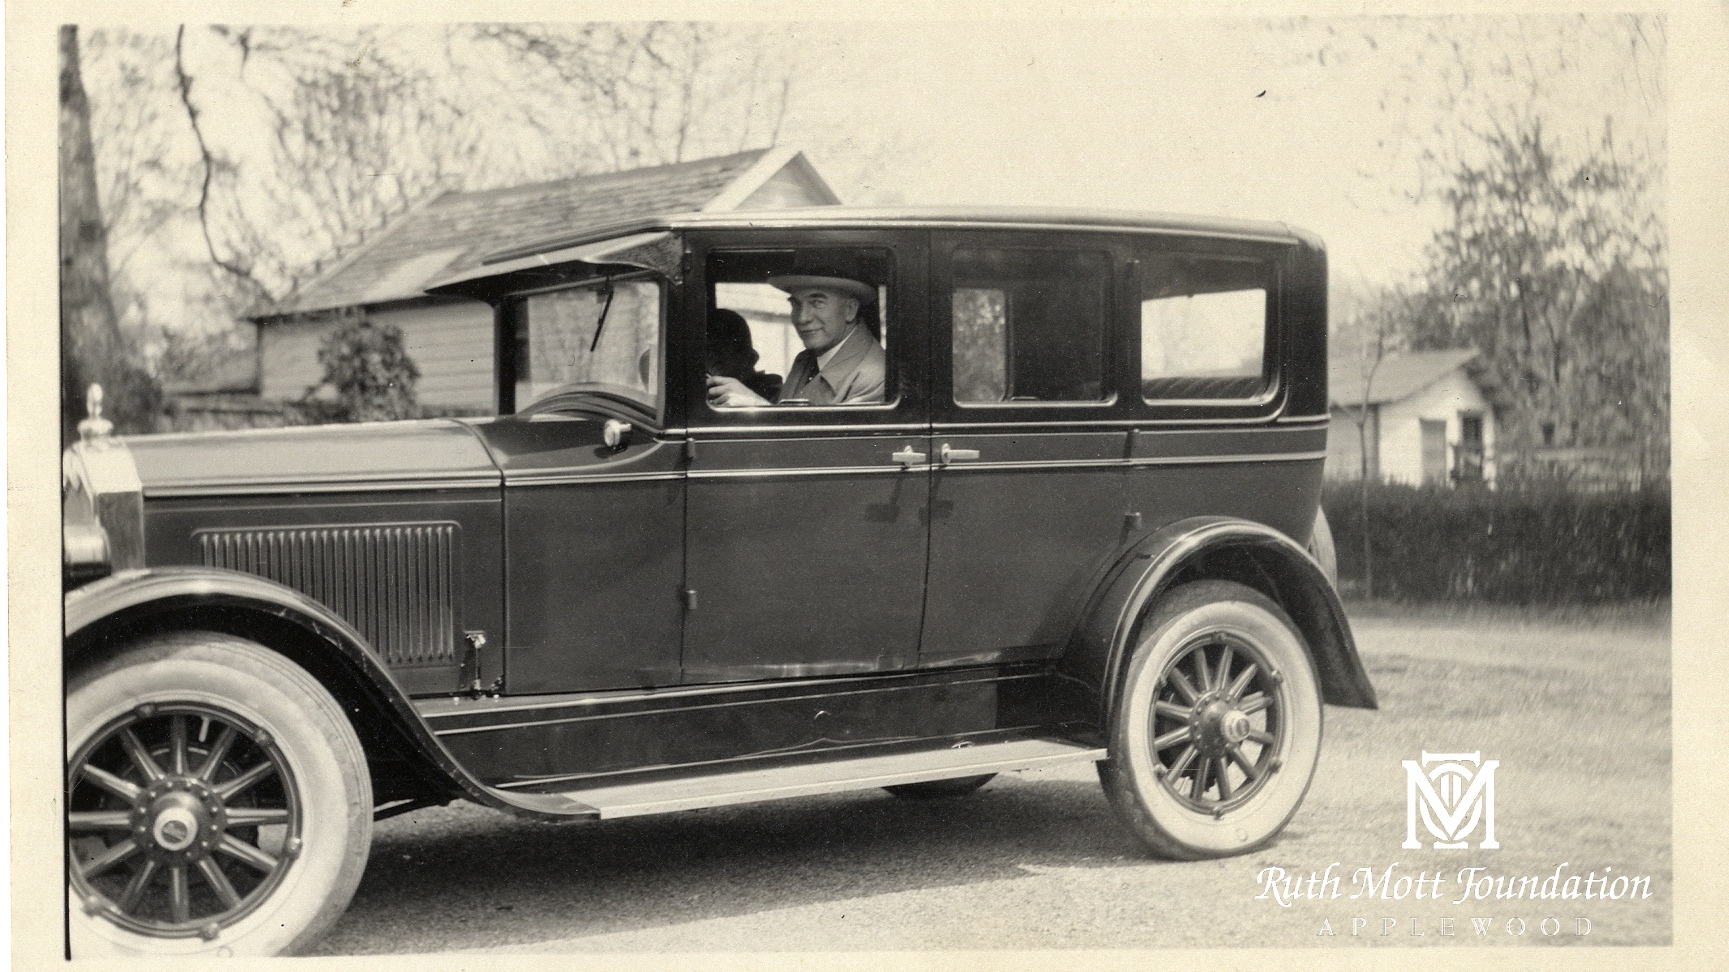 Historic photo of C.S. in a car